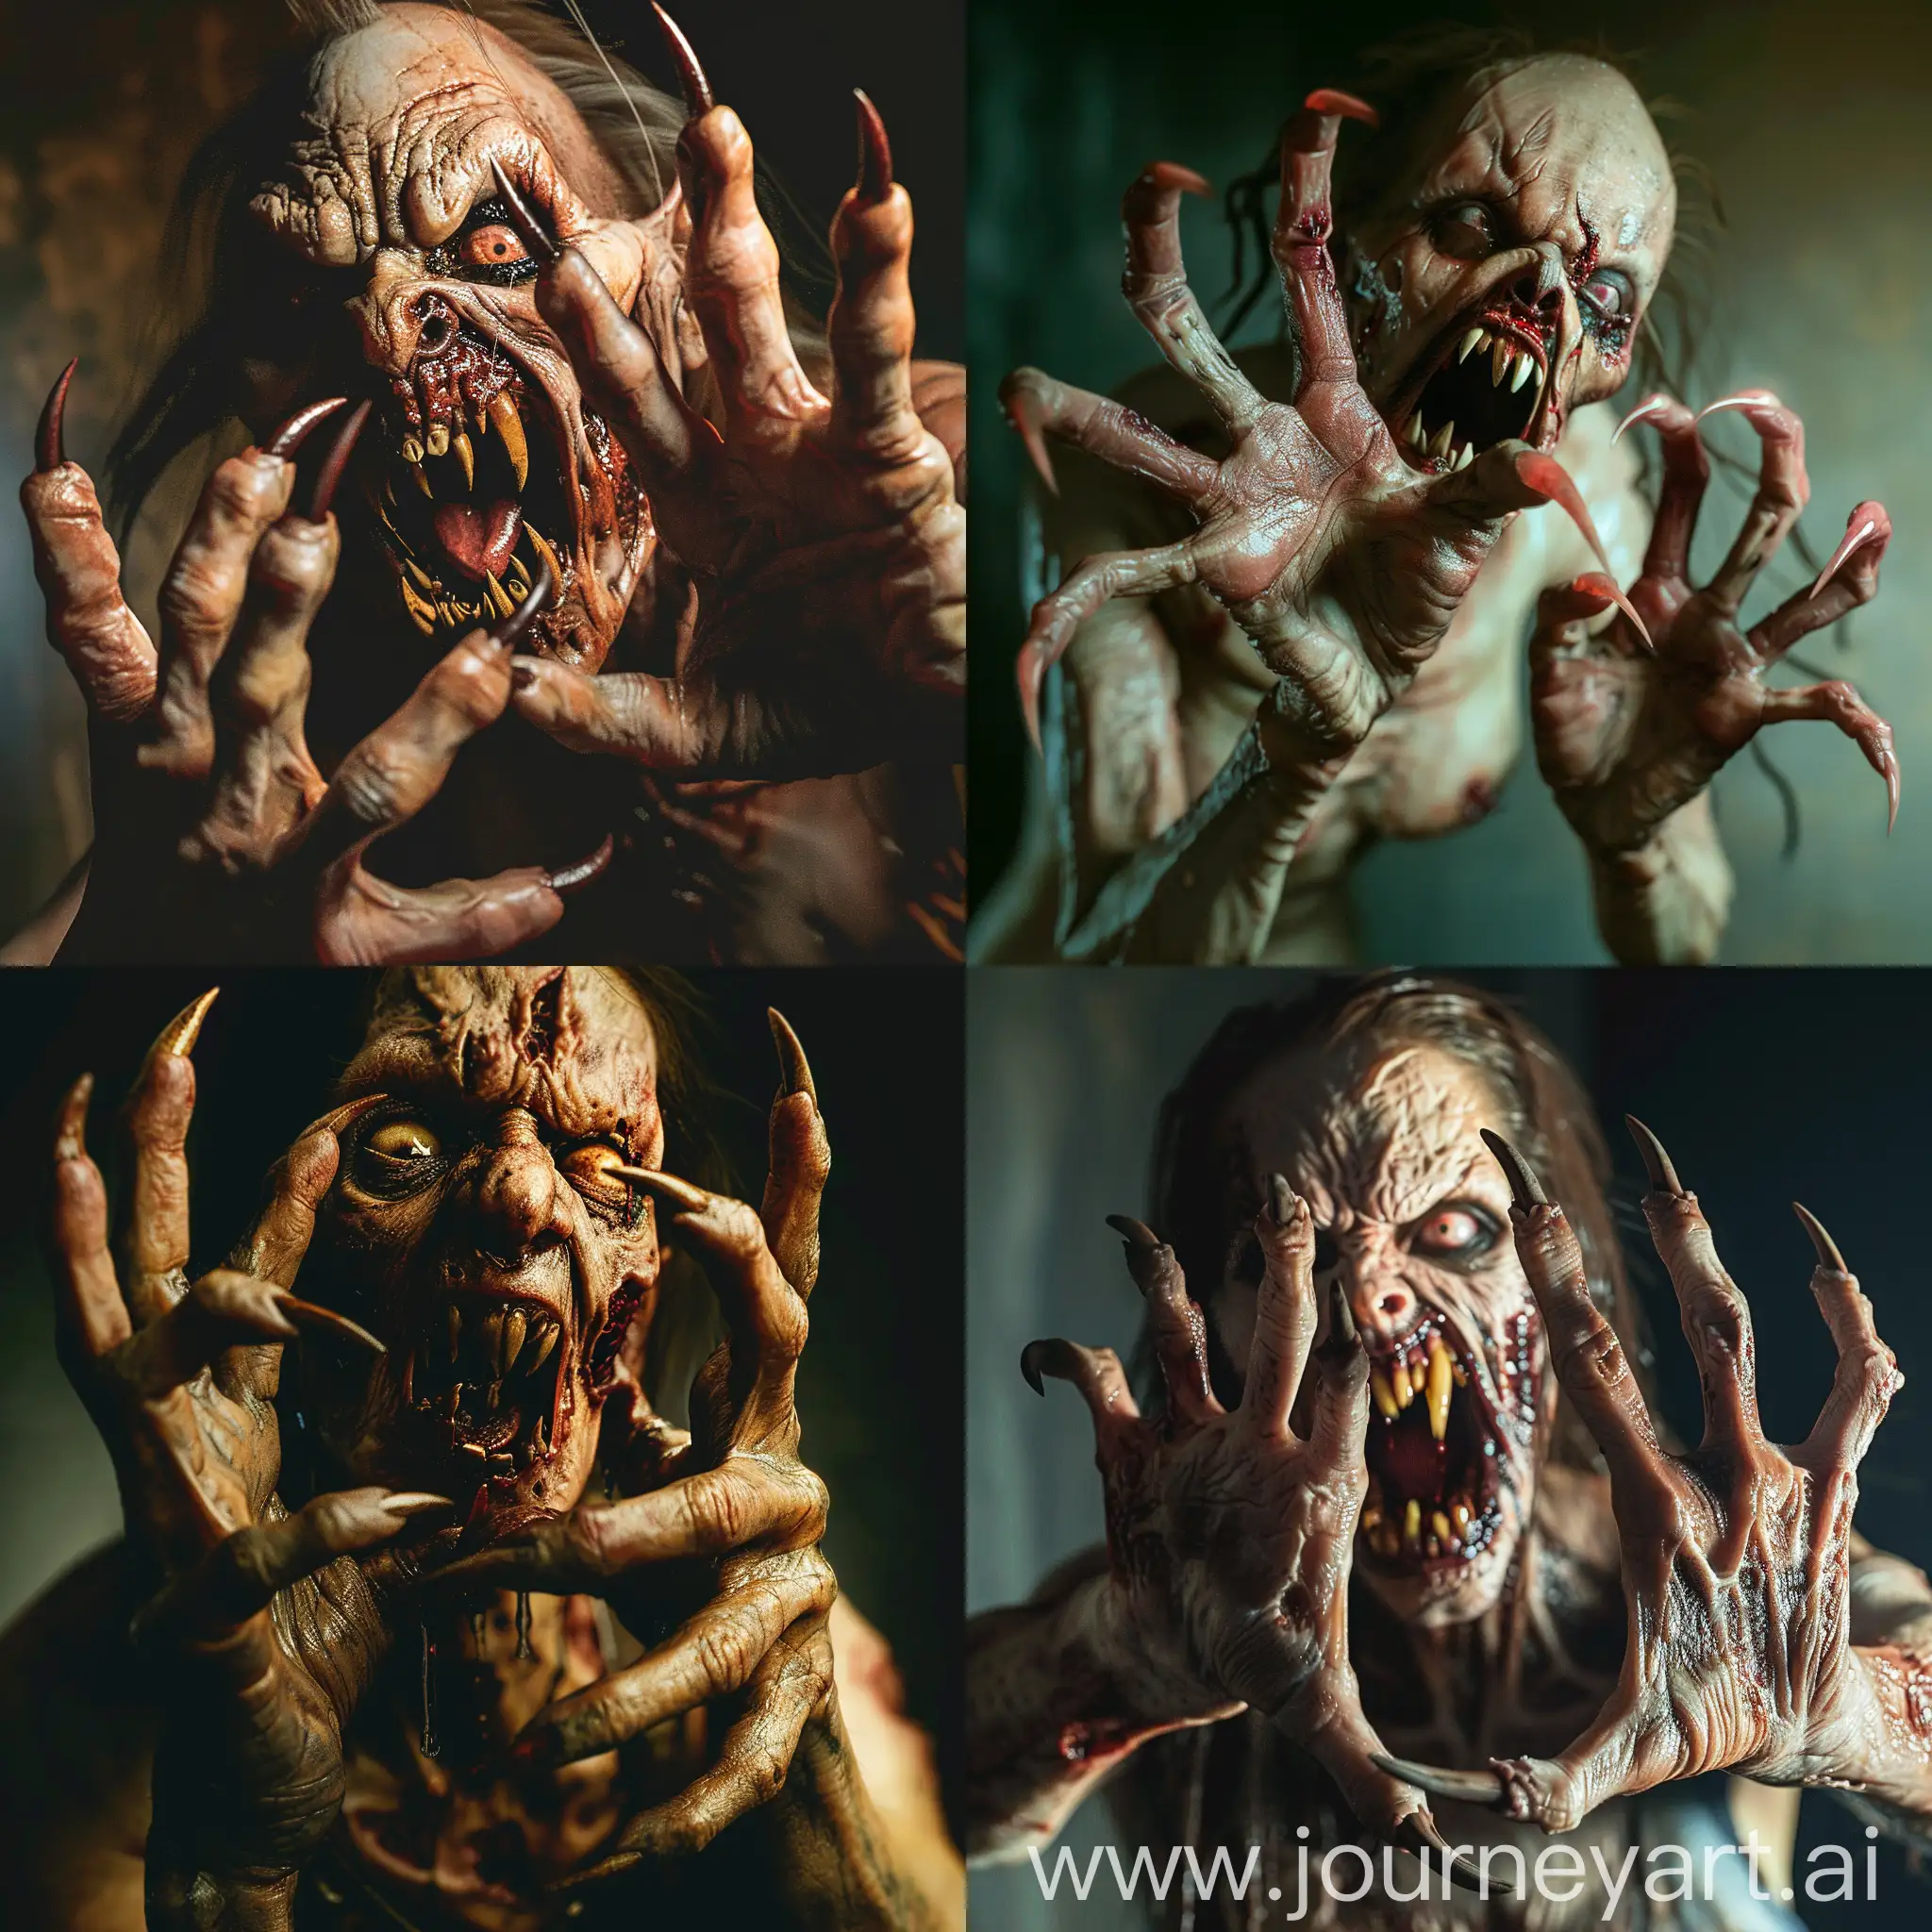 Create a scene where a rotten skin hungry terrible zombie woman with long curved pointed nails protruding from her five fingers two hands like menacing claws aggressively attacks, her mouth threateningly open exposing pointed teeth resembling fangs. The focus should be on realistic, detailed nails, horror, atmospheric lighting, full anatomical human hands, very clear without flaws with five fingers.